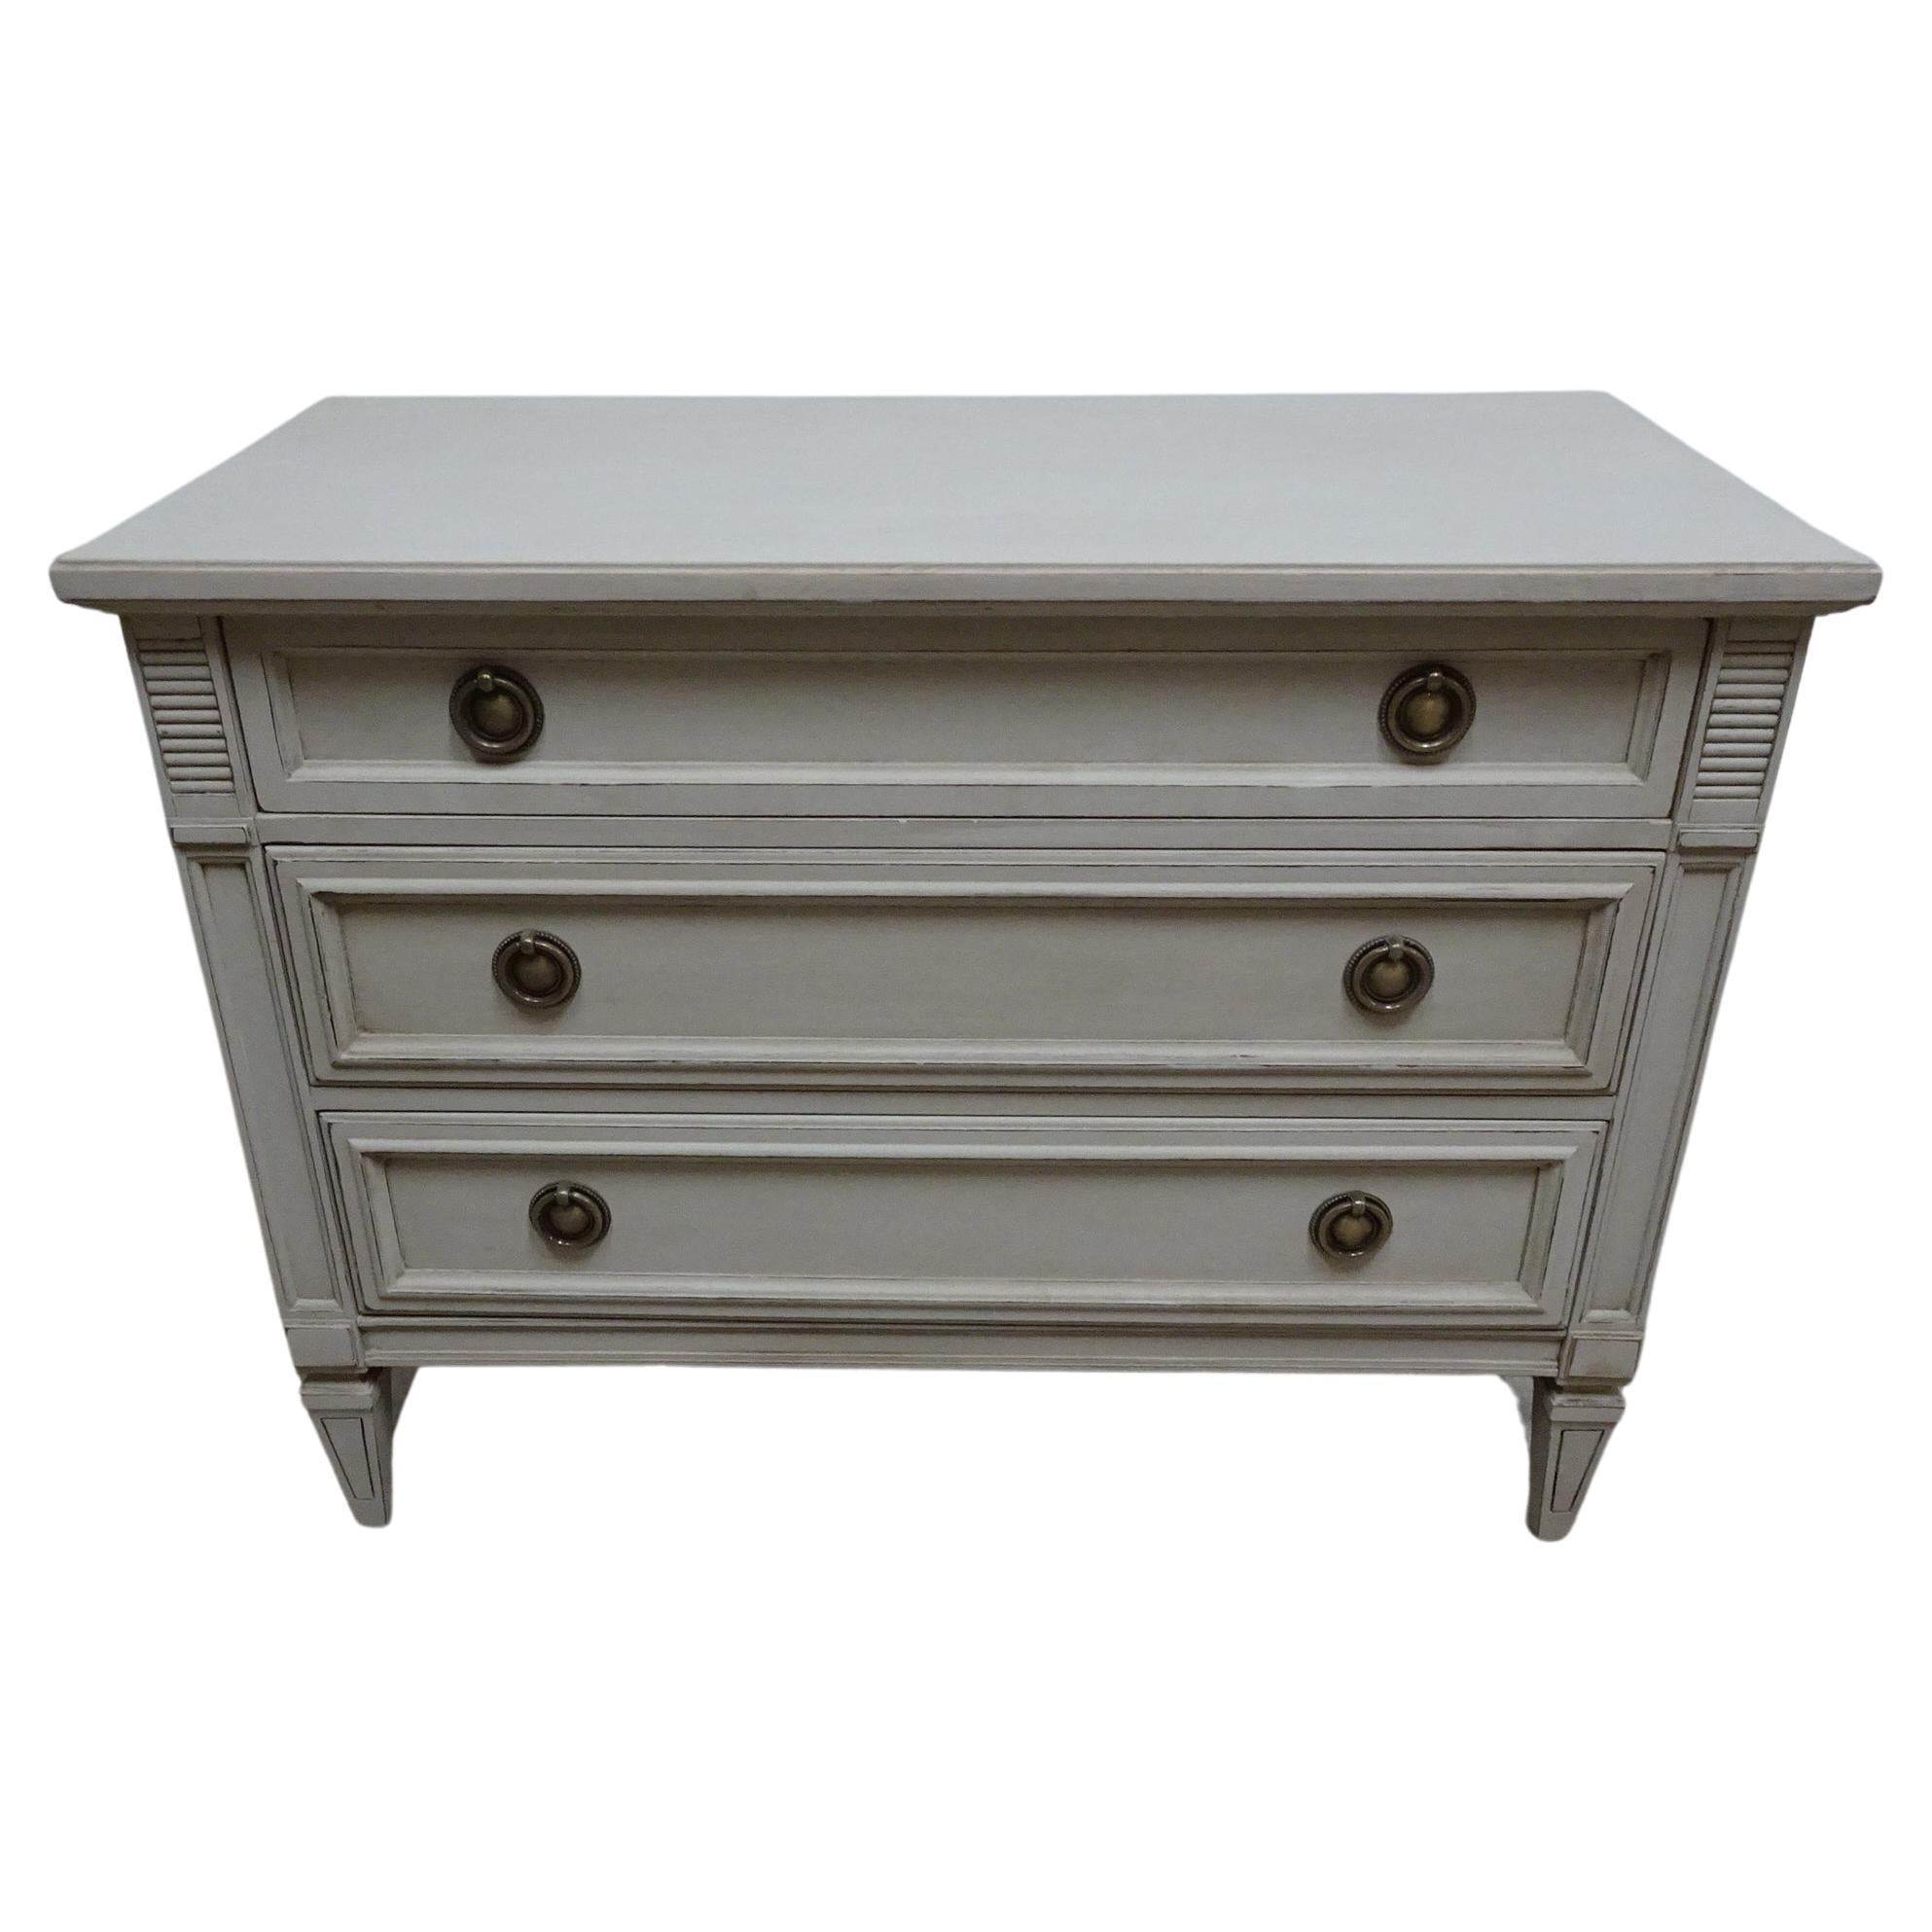   Unique Gustavian Style 3 Drawer Chest Of Drawers